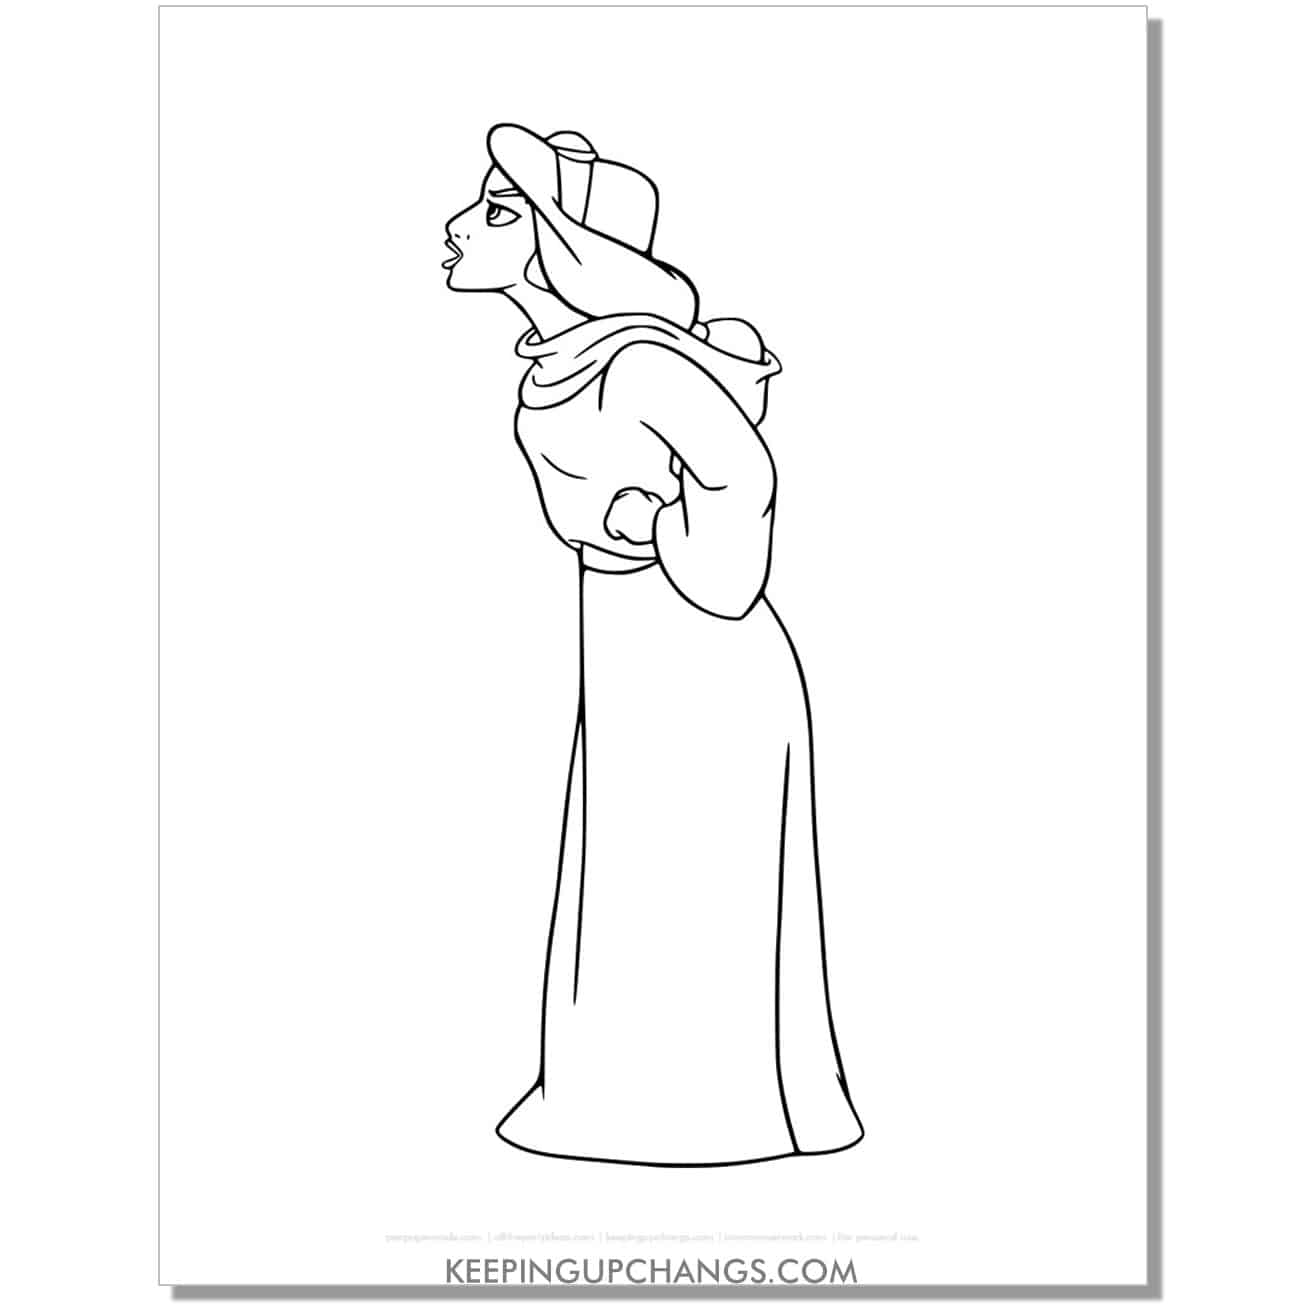 jasmine in civilian robe coloring page, sheet.